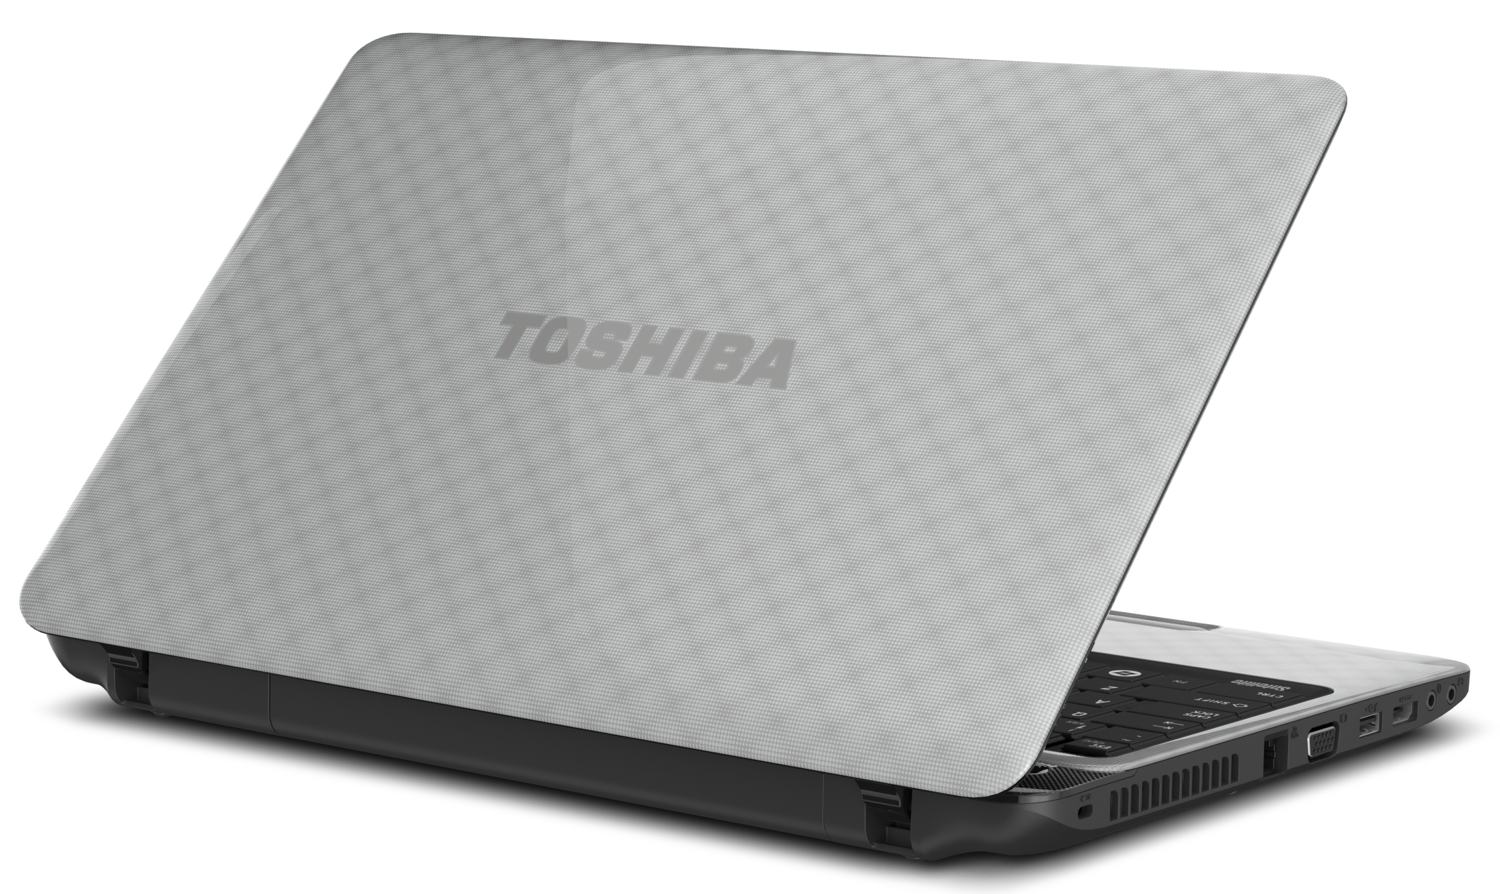 http://thetechjournal.com/wp-content/uploads/images/1111/1321885178-toshiba-satellite-l755s5349-156inch-led-laptop--3.jpg